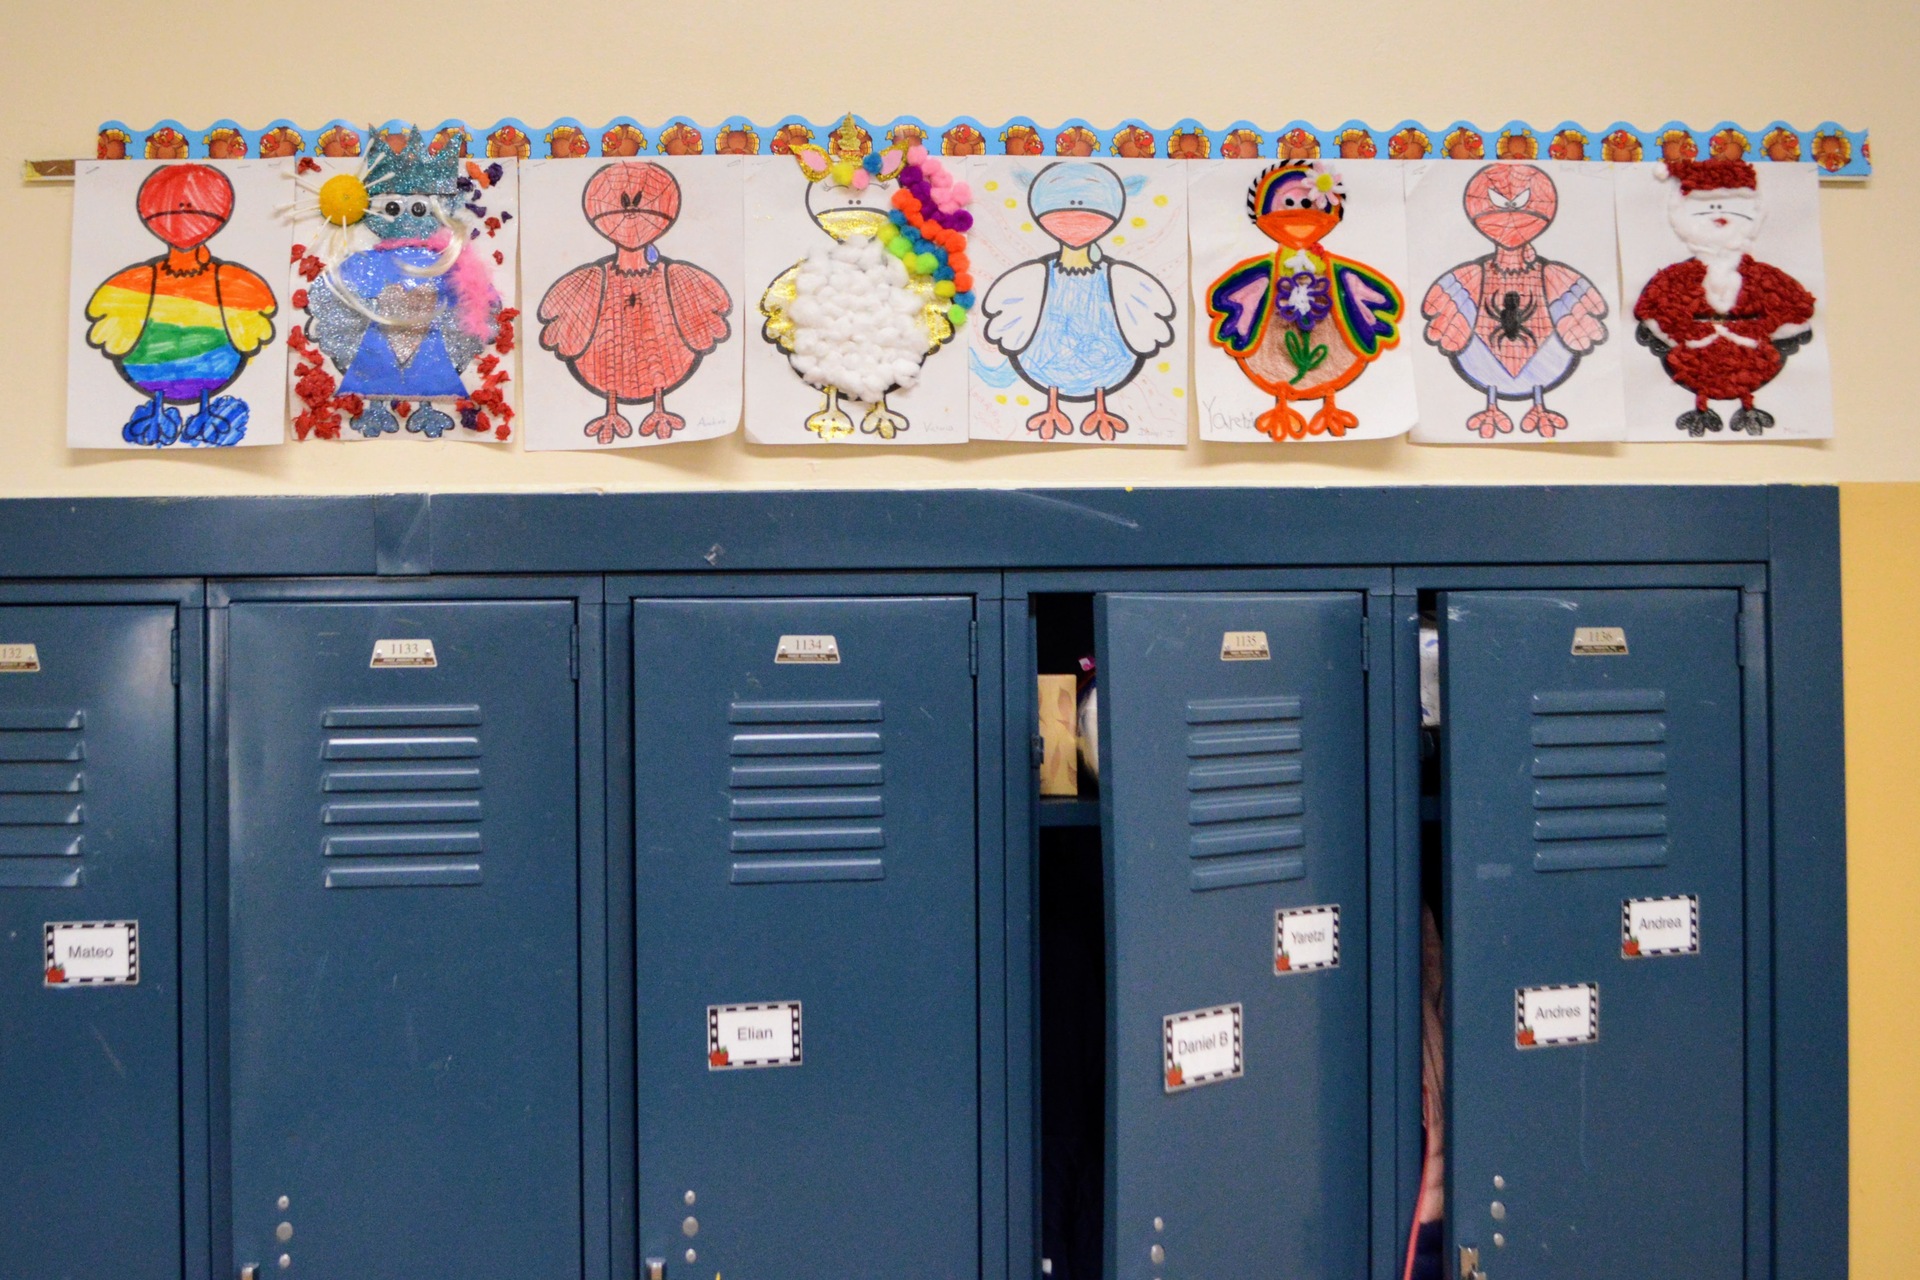 Art pieces at Barry Elementary School